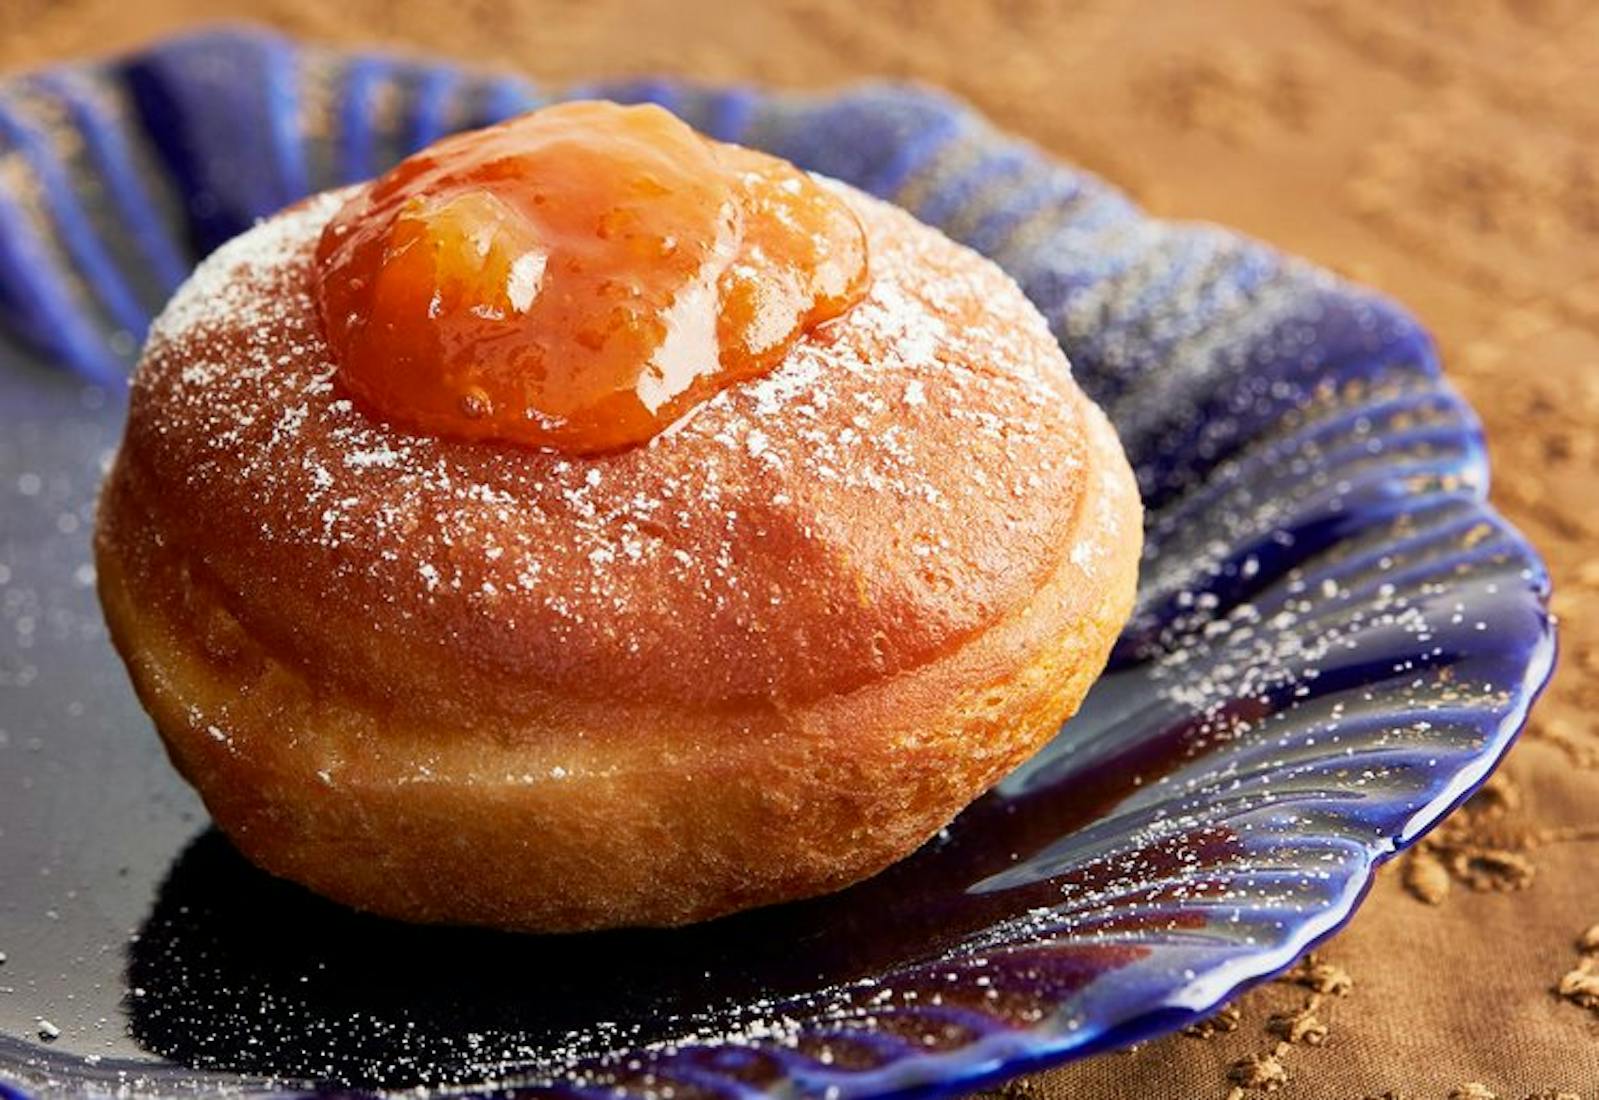 Doughnut with dollop of apricot jam and powdered sugar on blue plate.